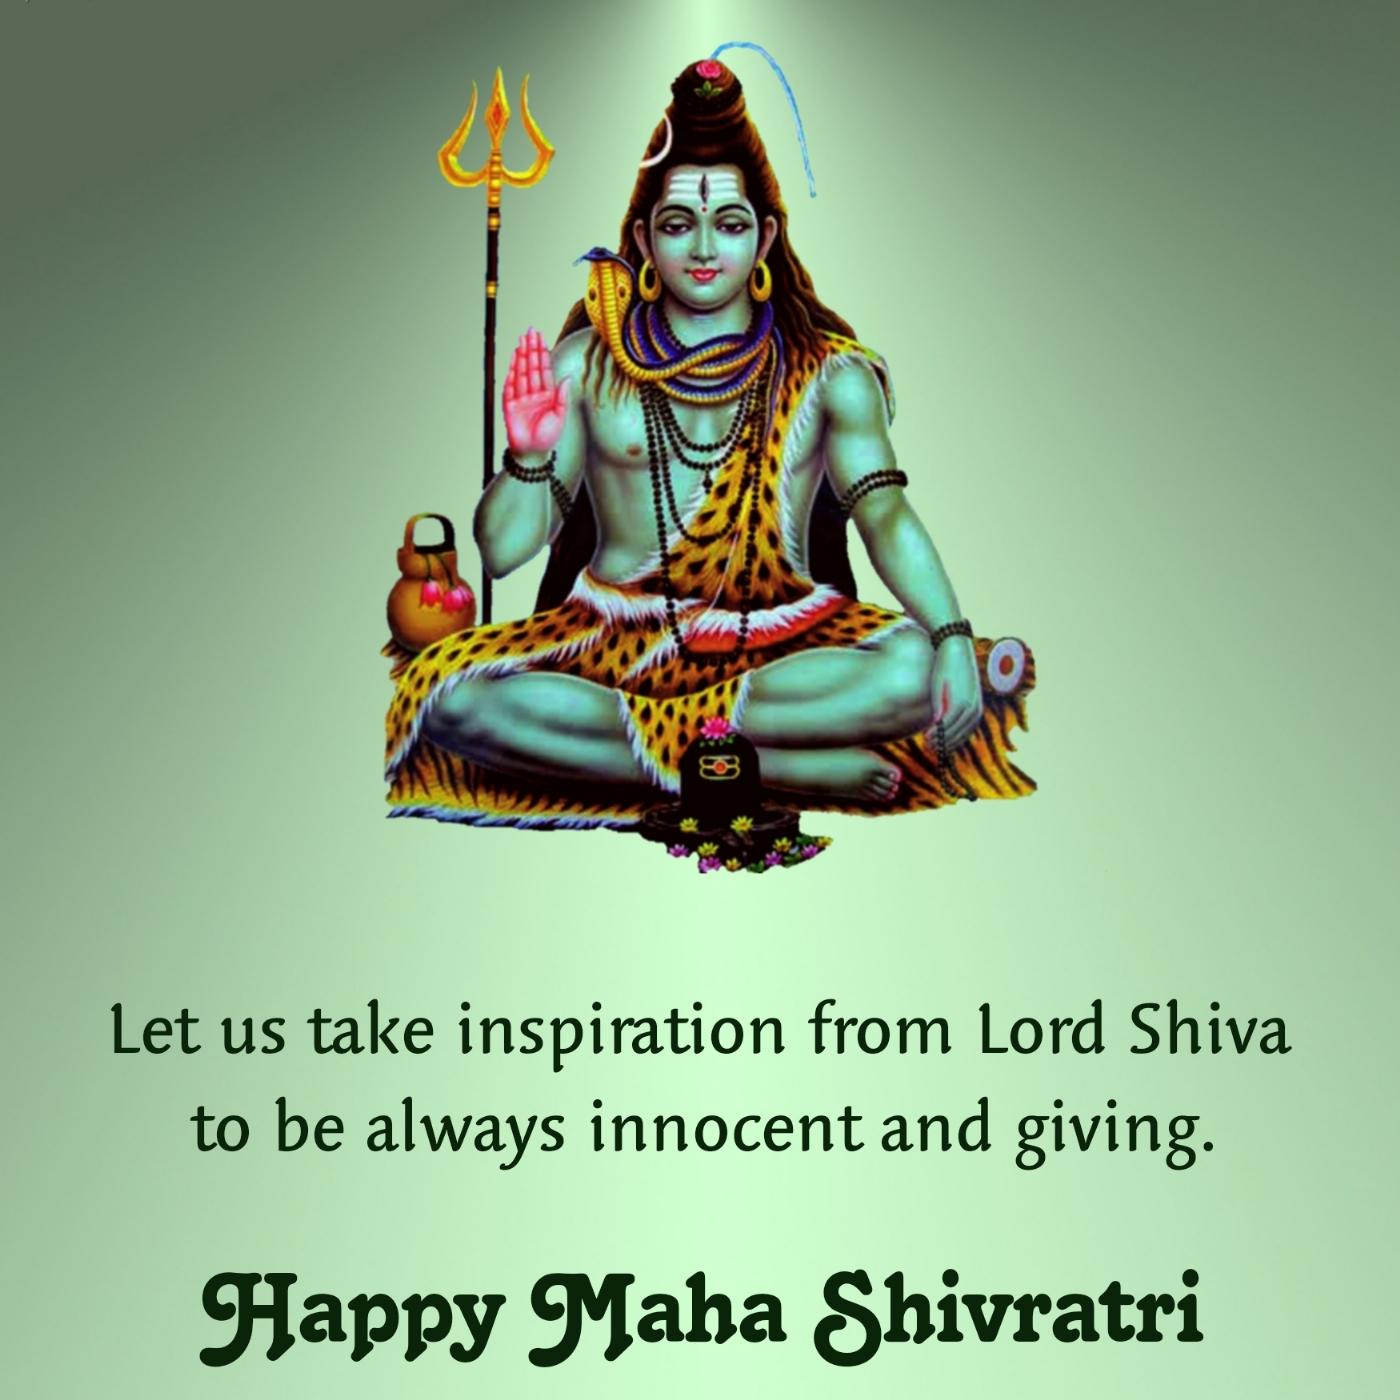 Let us take inspiration from Lord Shiva to be always innocent and giving